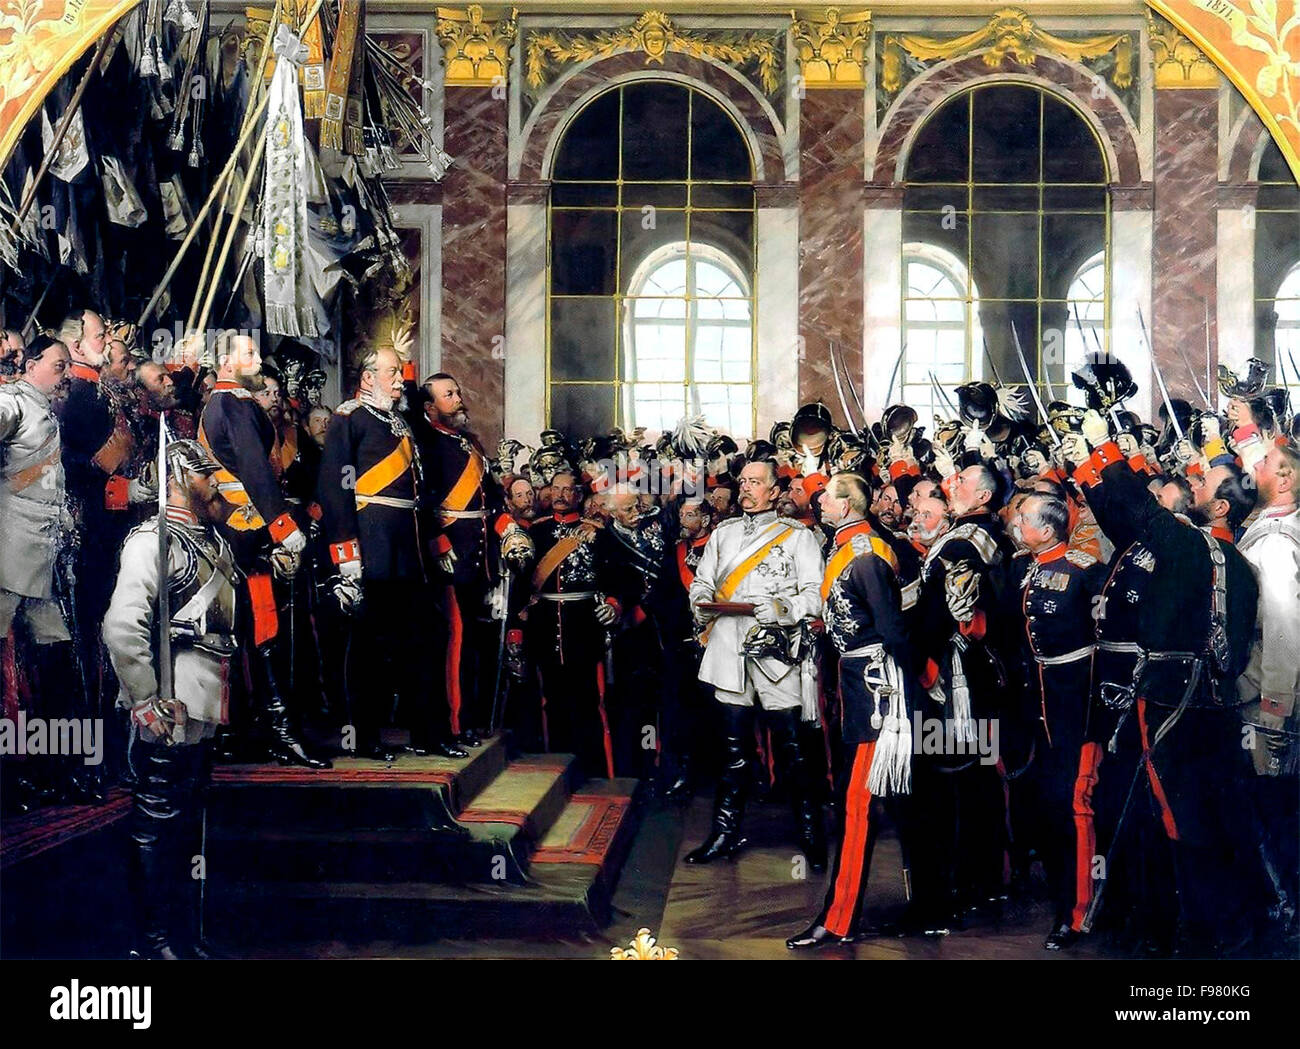 The proclamation of the German Empire - Proclamation of Prussian king Wilhelm I as German Emperor at Versailles, by Anton von Werner.  1885 Stock Photo